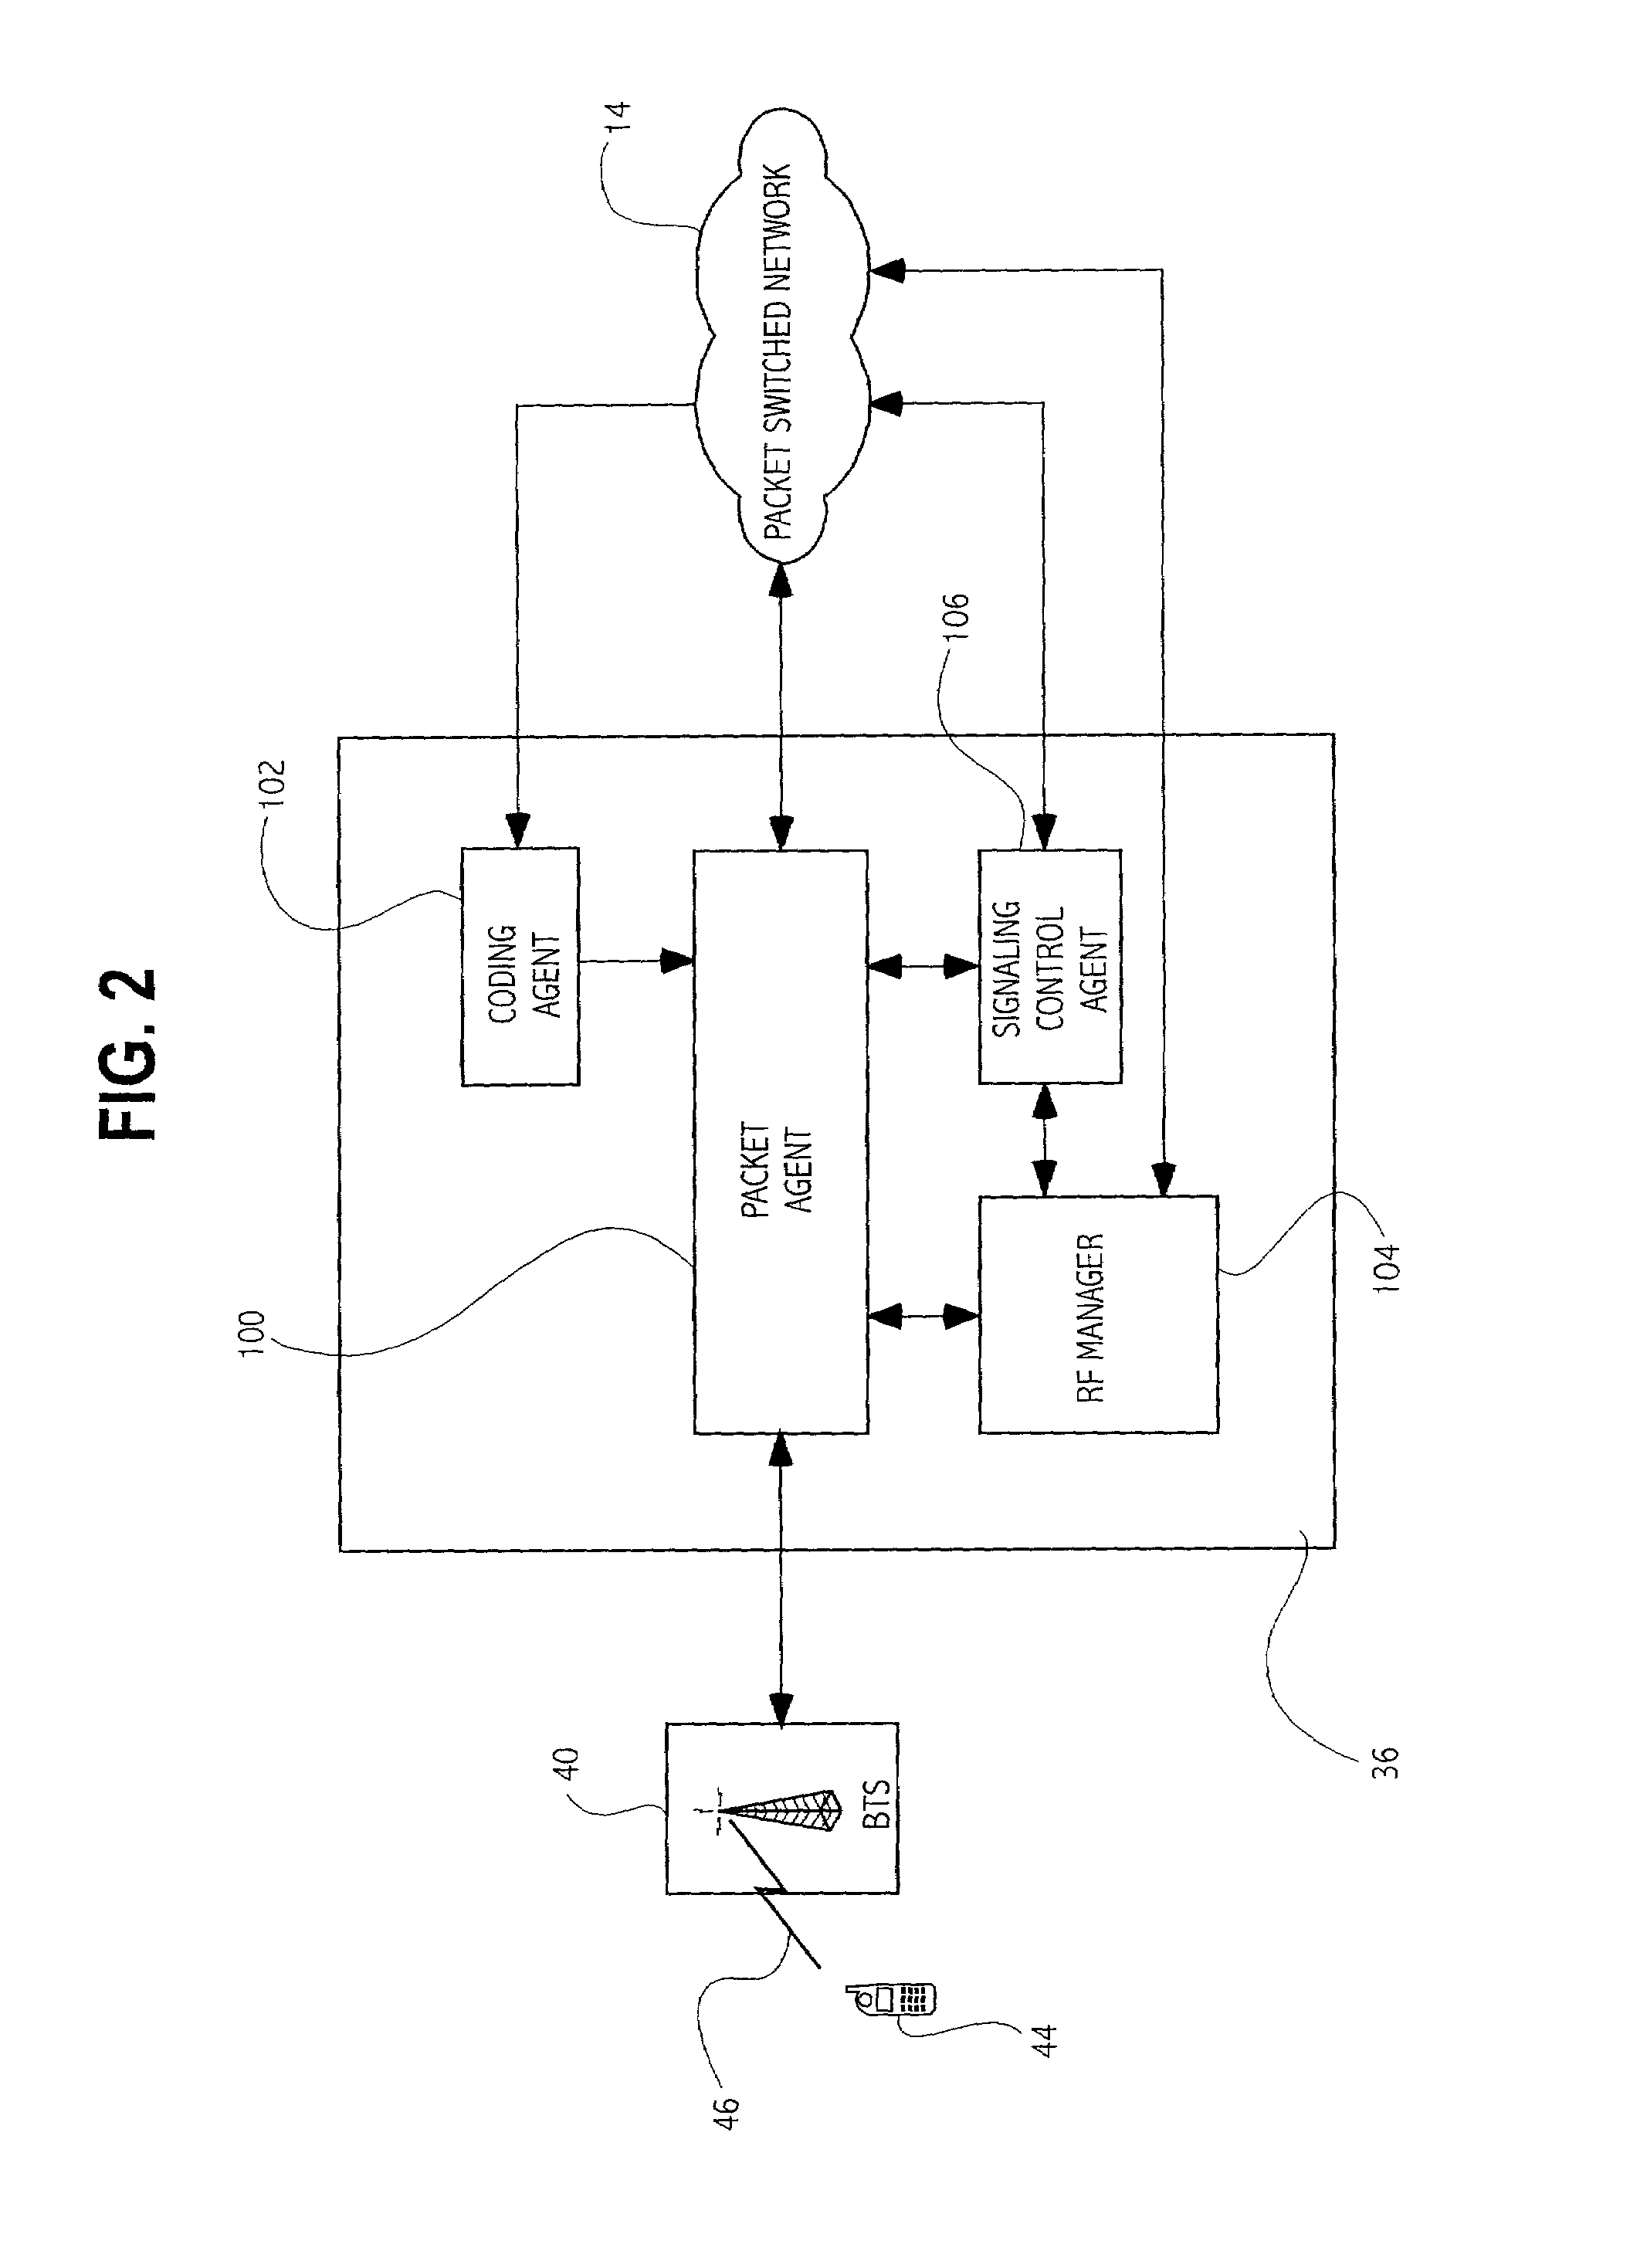 Wireless access gateway to packet switched network